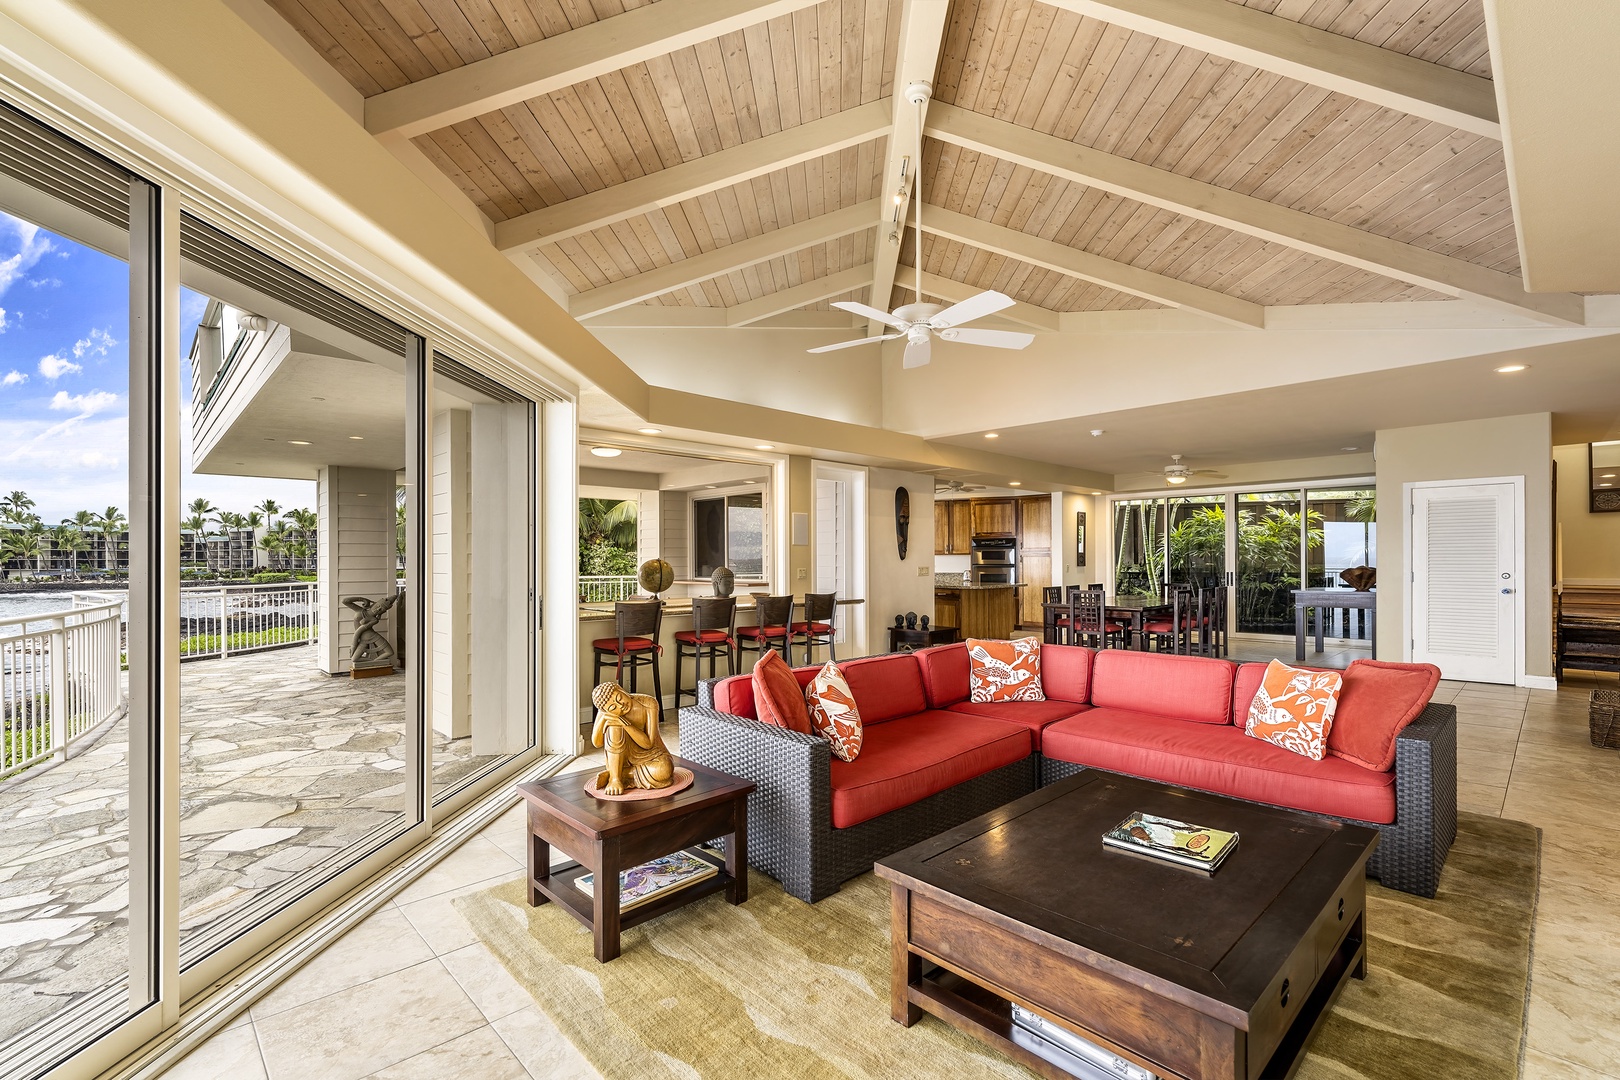 Kailua Kona Vacation Rentals, Ali'i Point #12 - Open sightline and vaulted ceiling throughout